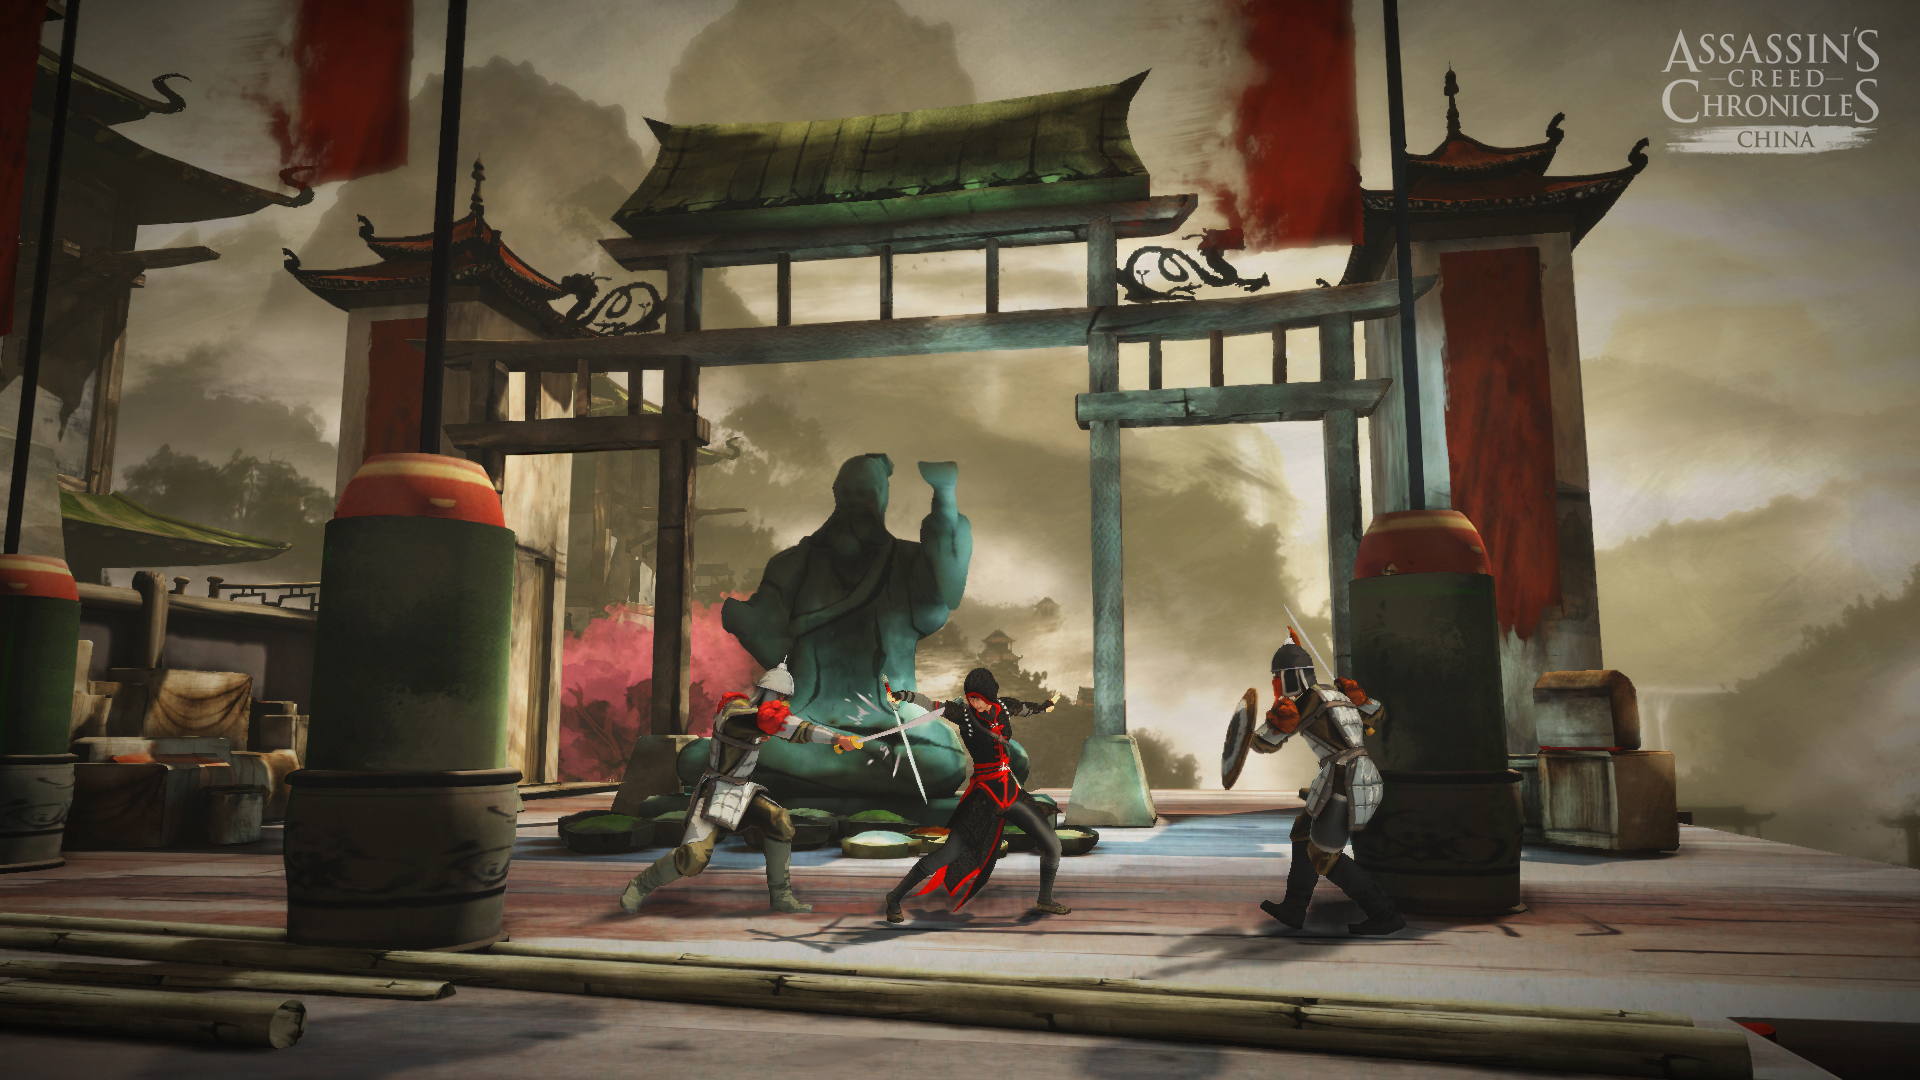 Assassin's Creed Chronicles: China available now. Launch trailer released | TheXboxHub